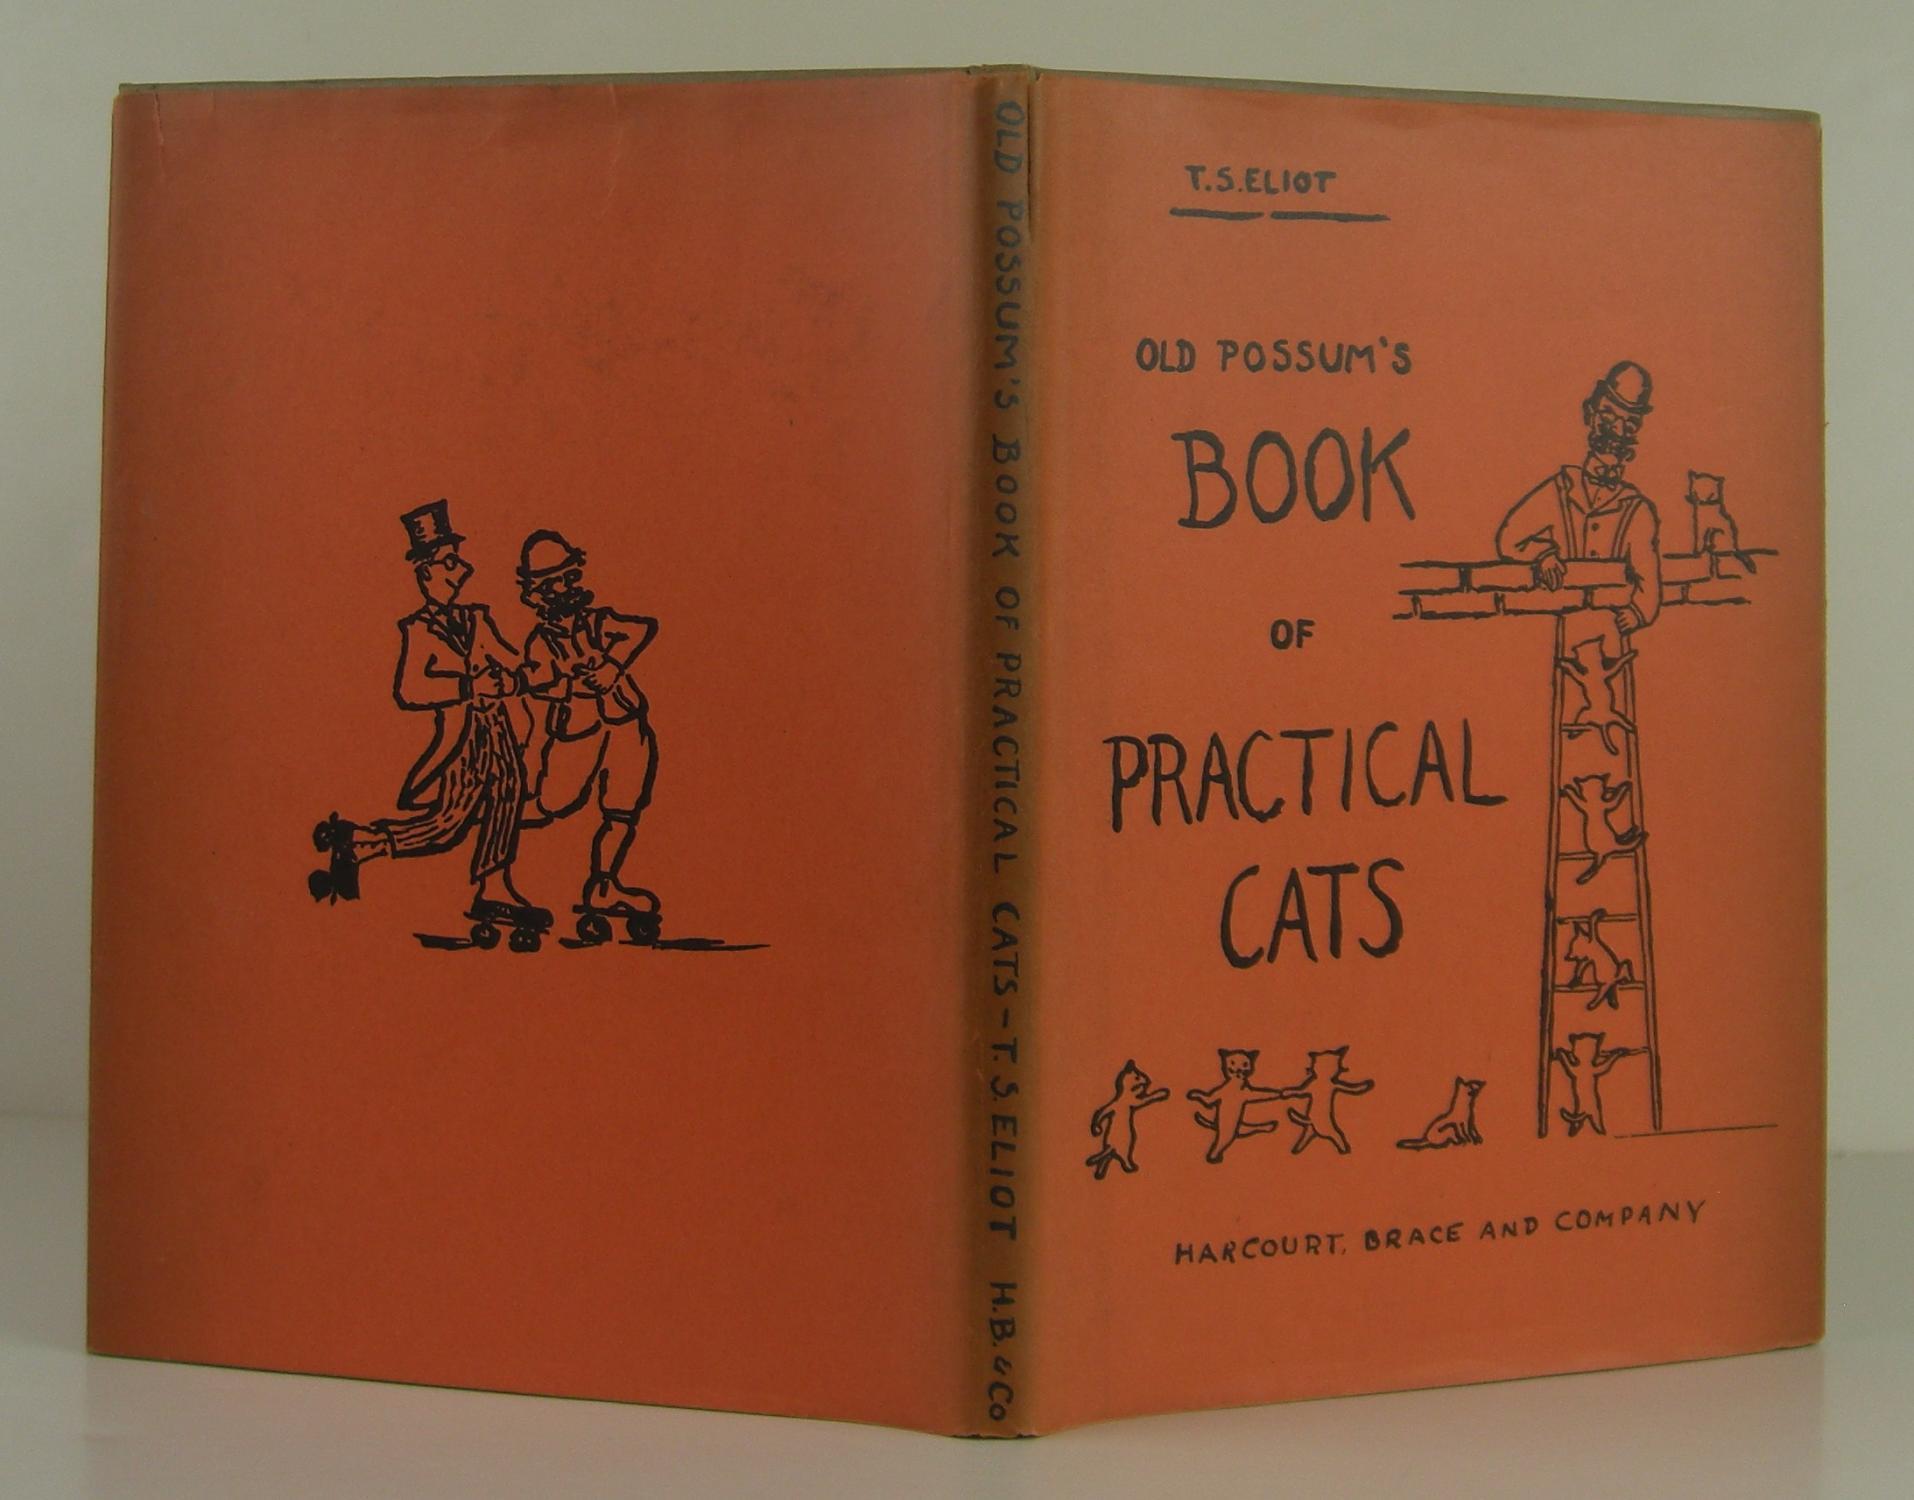 Old Possum's Book of Practical Cats - Eliot, T.S.